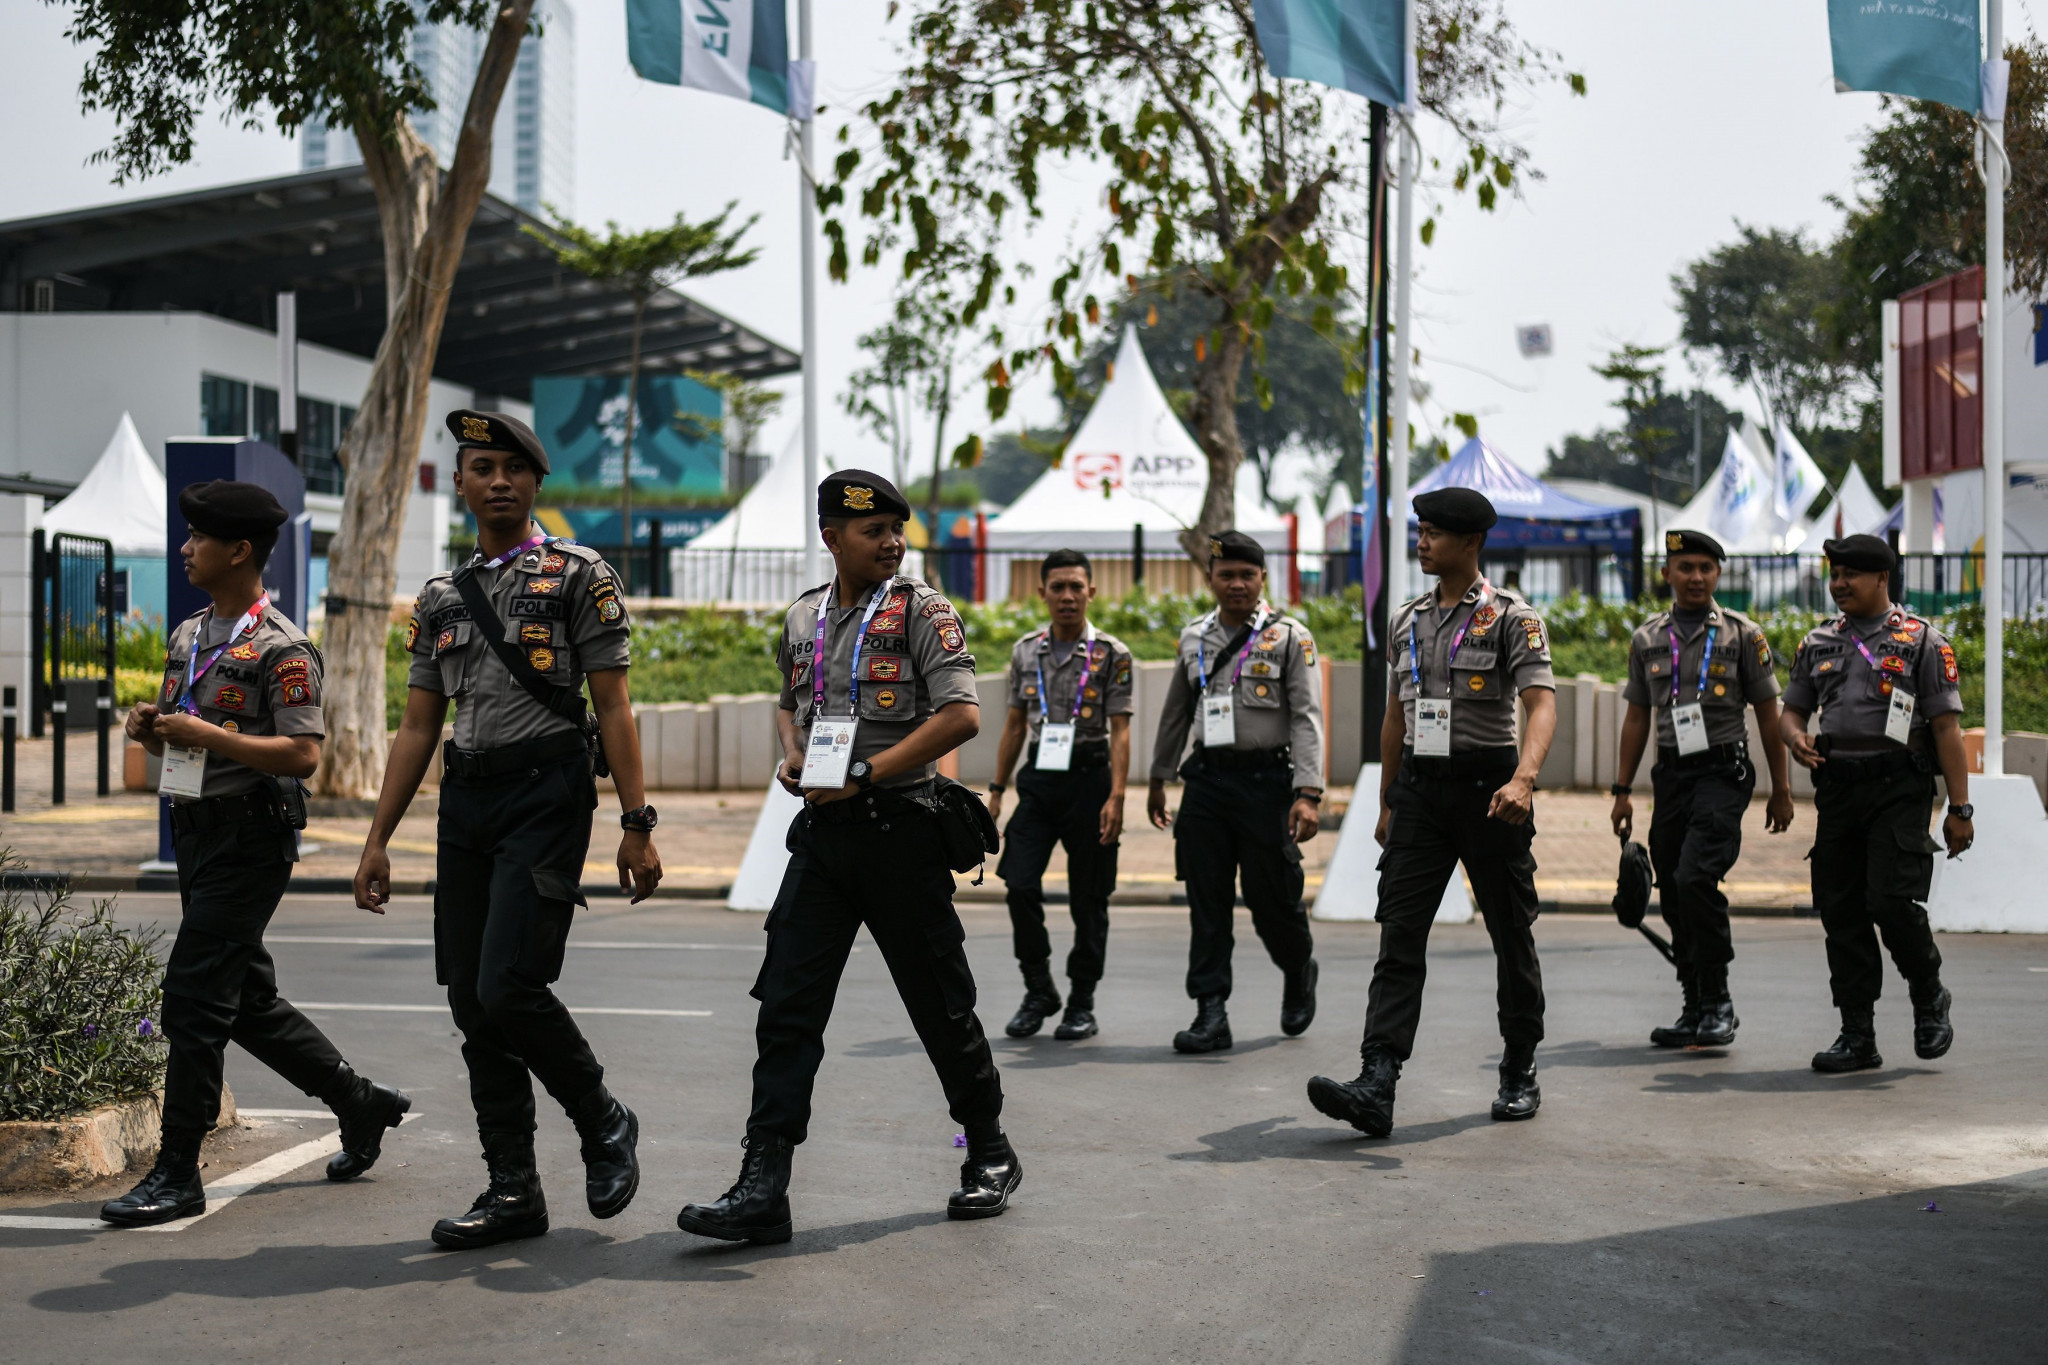 Security is expected to be extremely tight for the 18th edition of the Asian Games, which are scheduled to begin tomorrow with the Opening Ceremony ©Getty Images